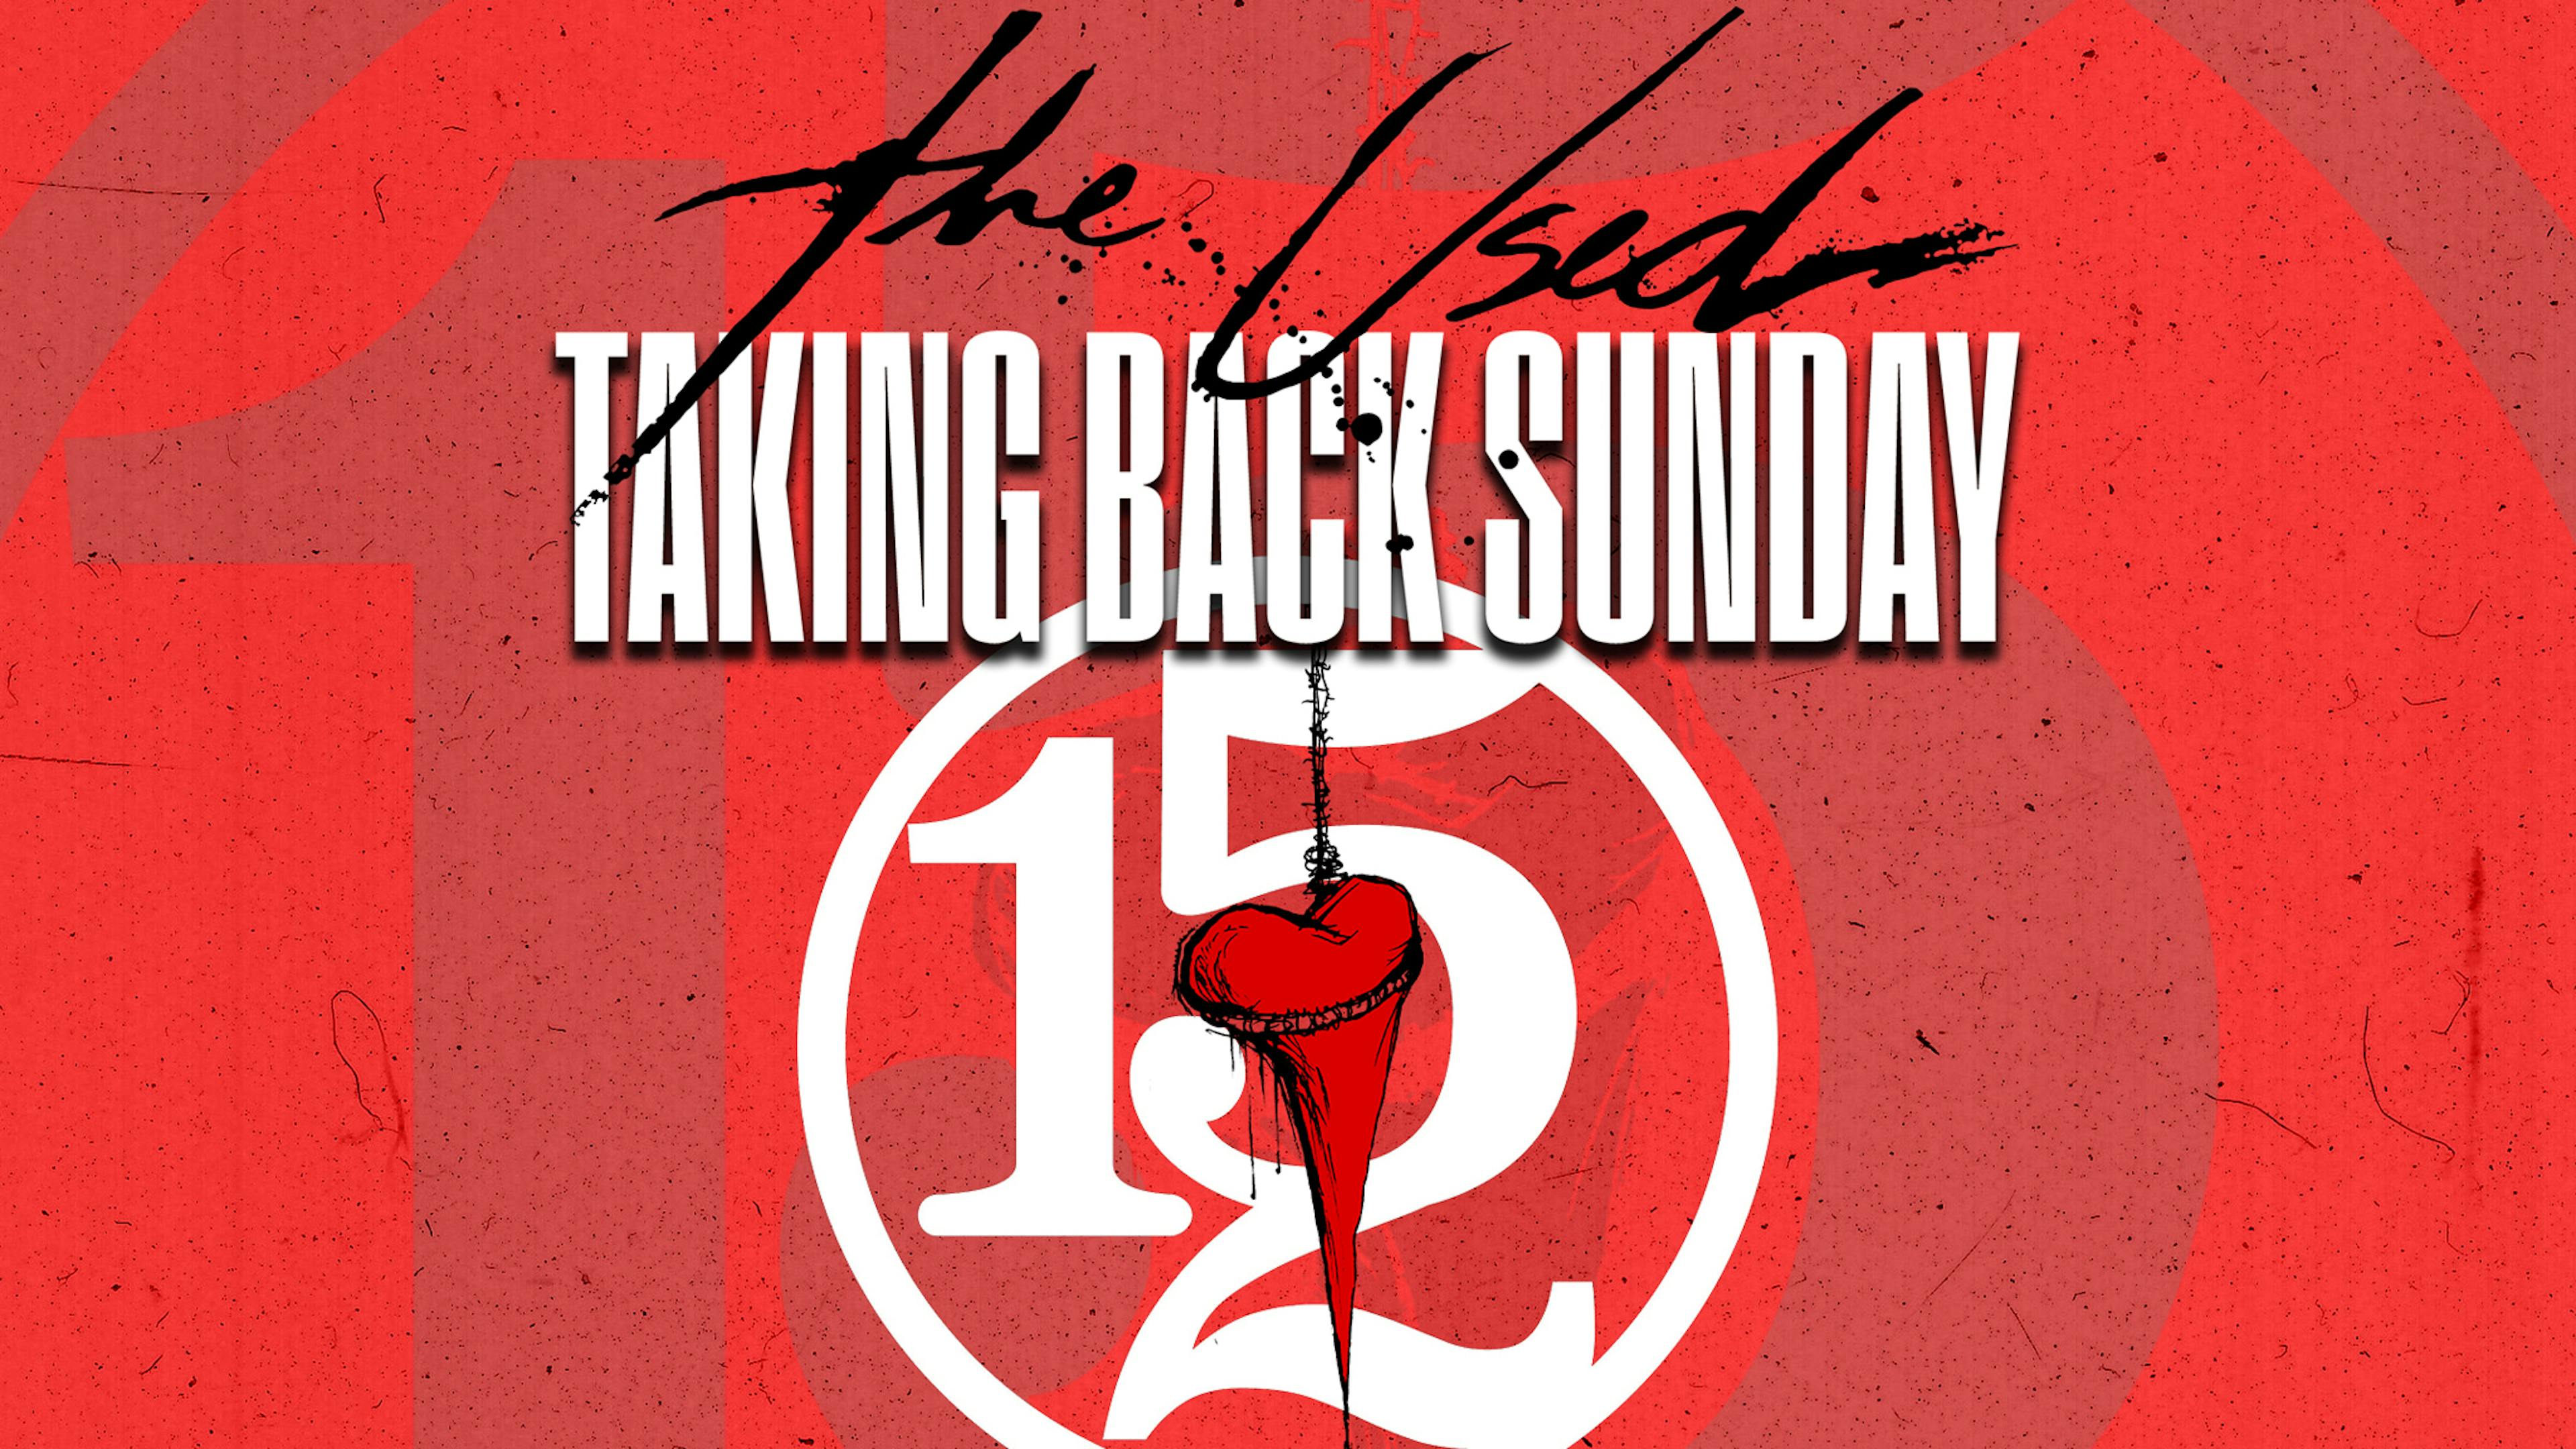 The Used and Taking Back Sunday have announced a U.S. co-headline tour